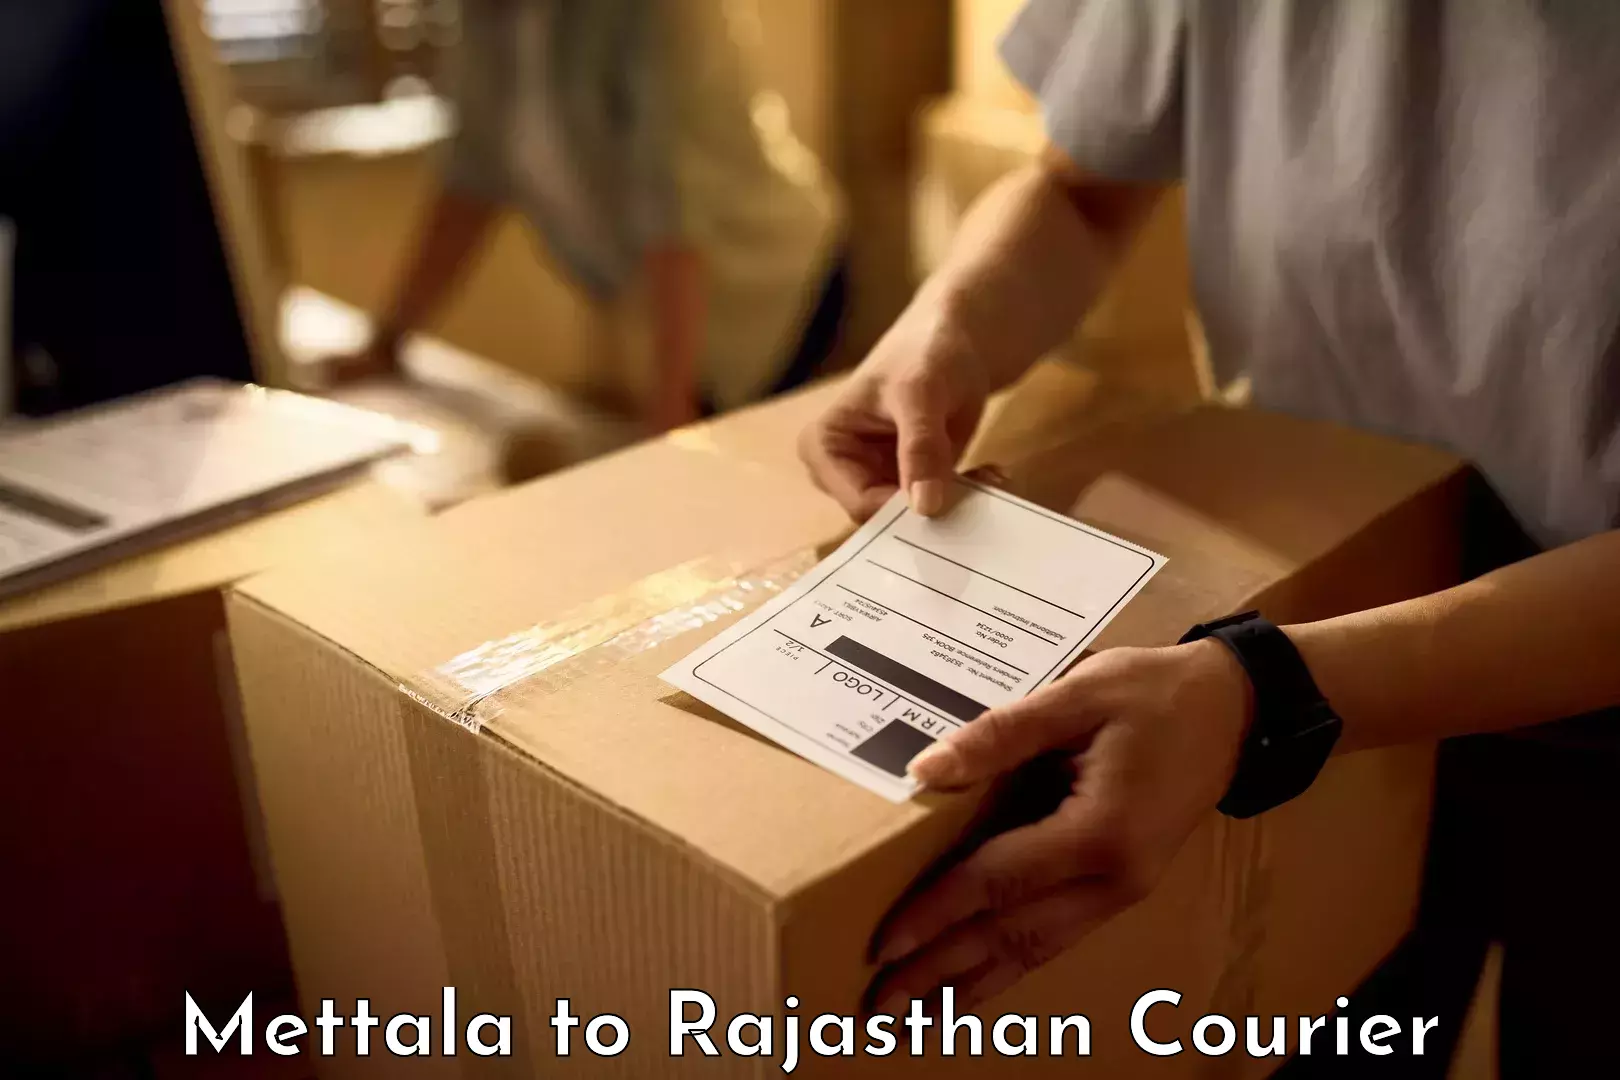 Luggage shipment specialists Mettala to Rajasthan